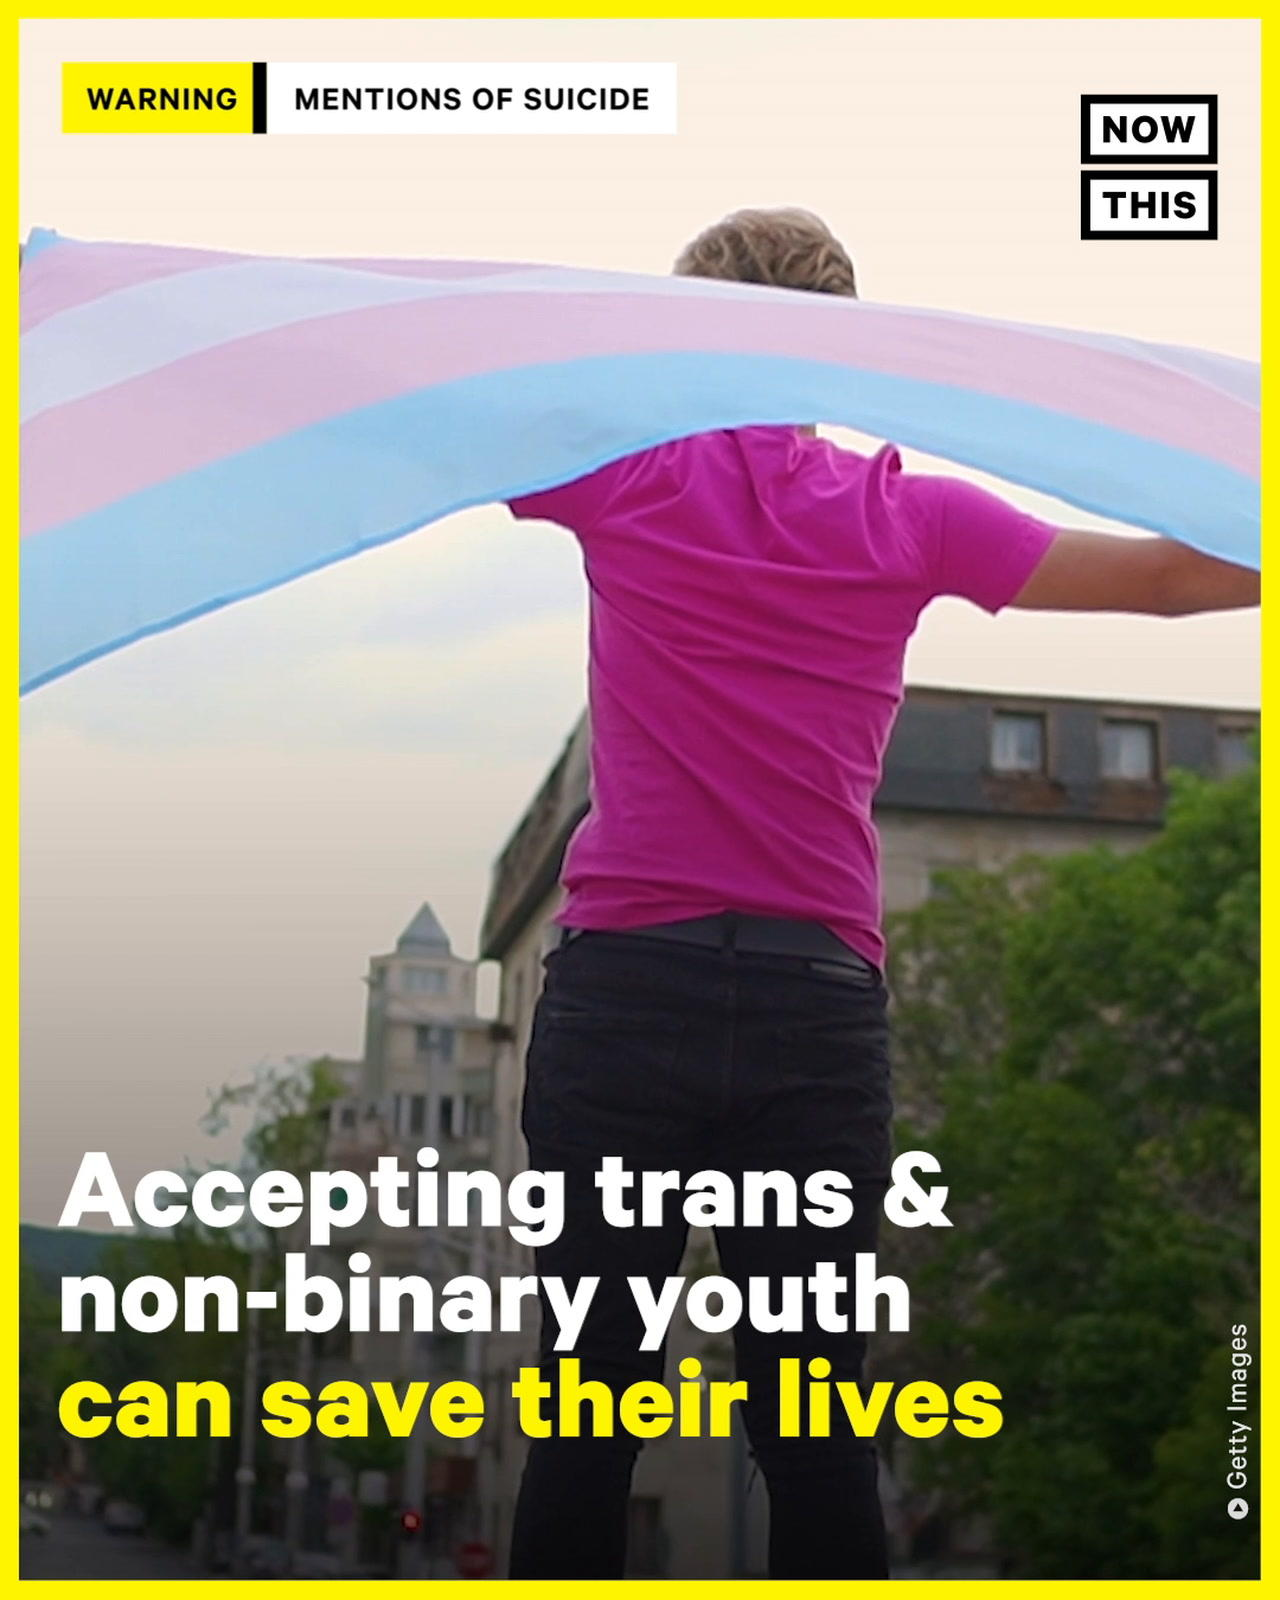 Research Shows Being an Ally to Trans and Non-Binary Youth Can Save Their Lives